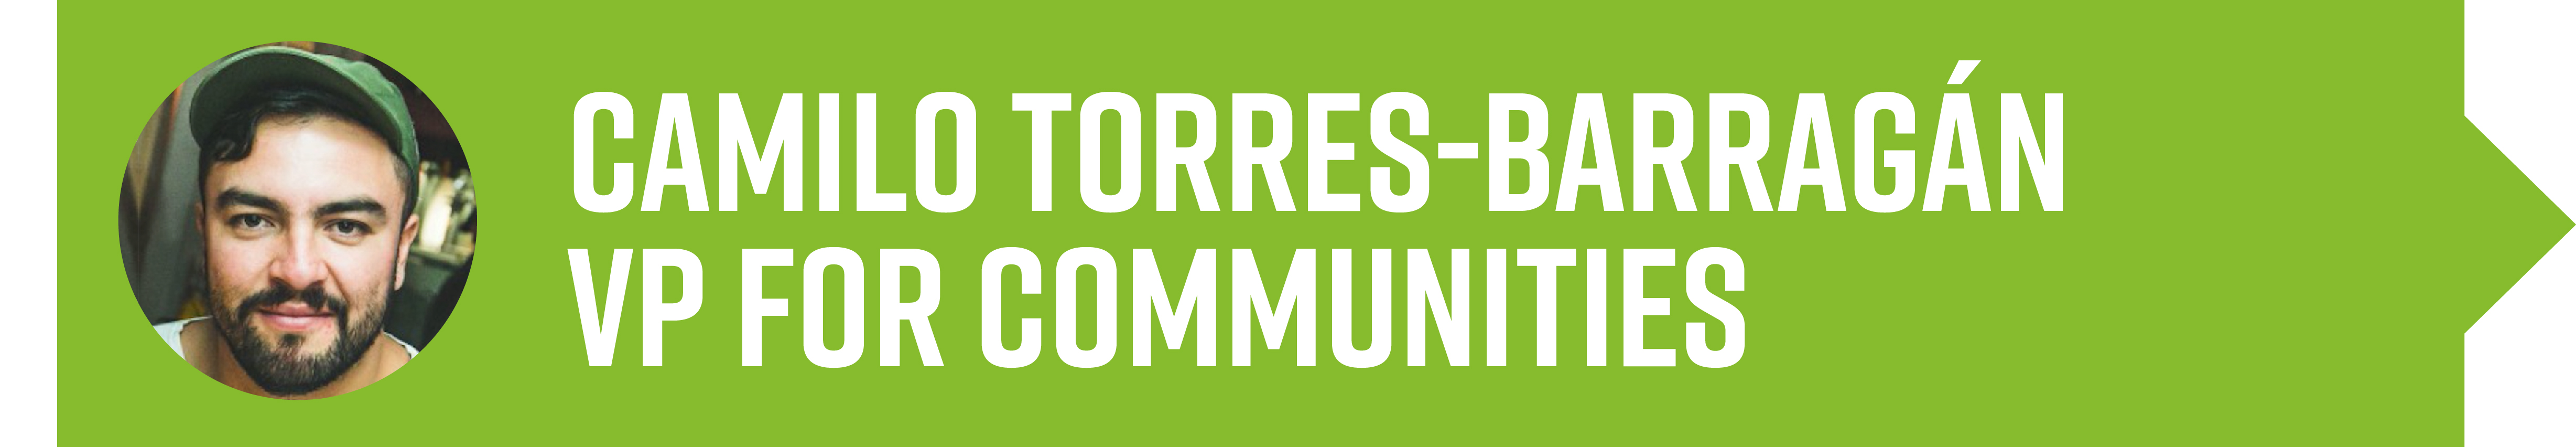 Image contains a photo, name and title for Camilo Torres-Barragán, Vice President for Communities